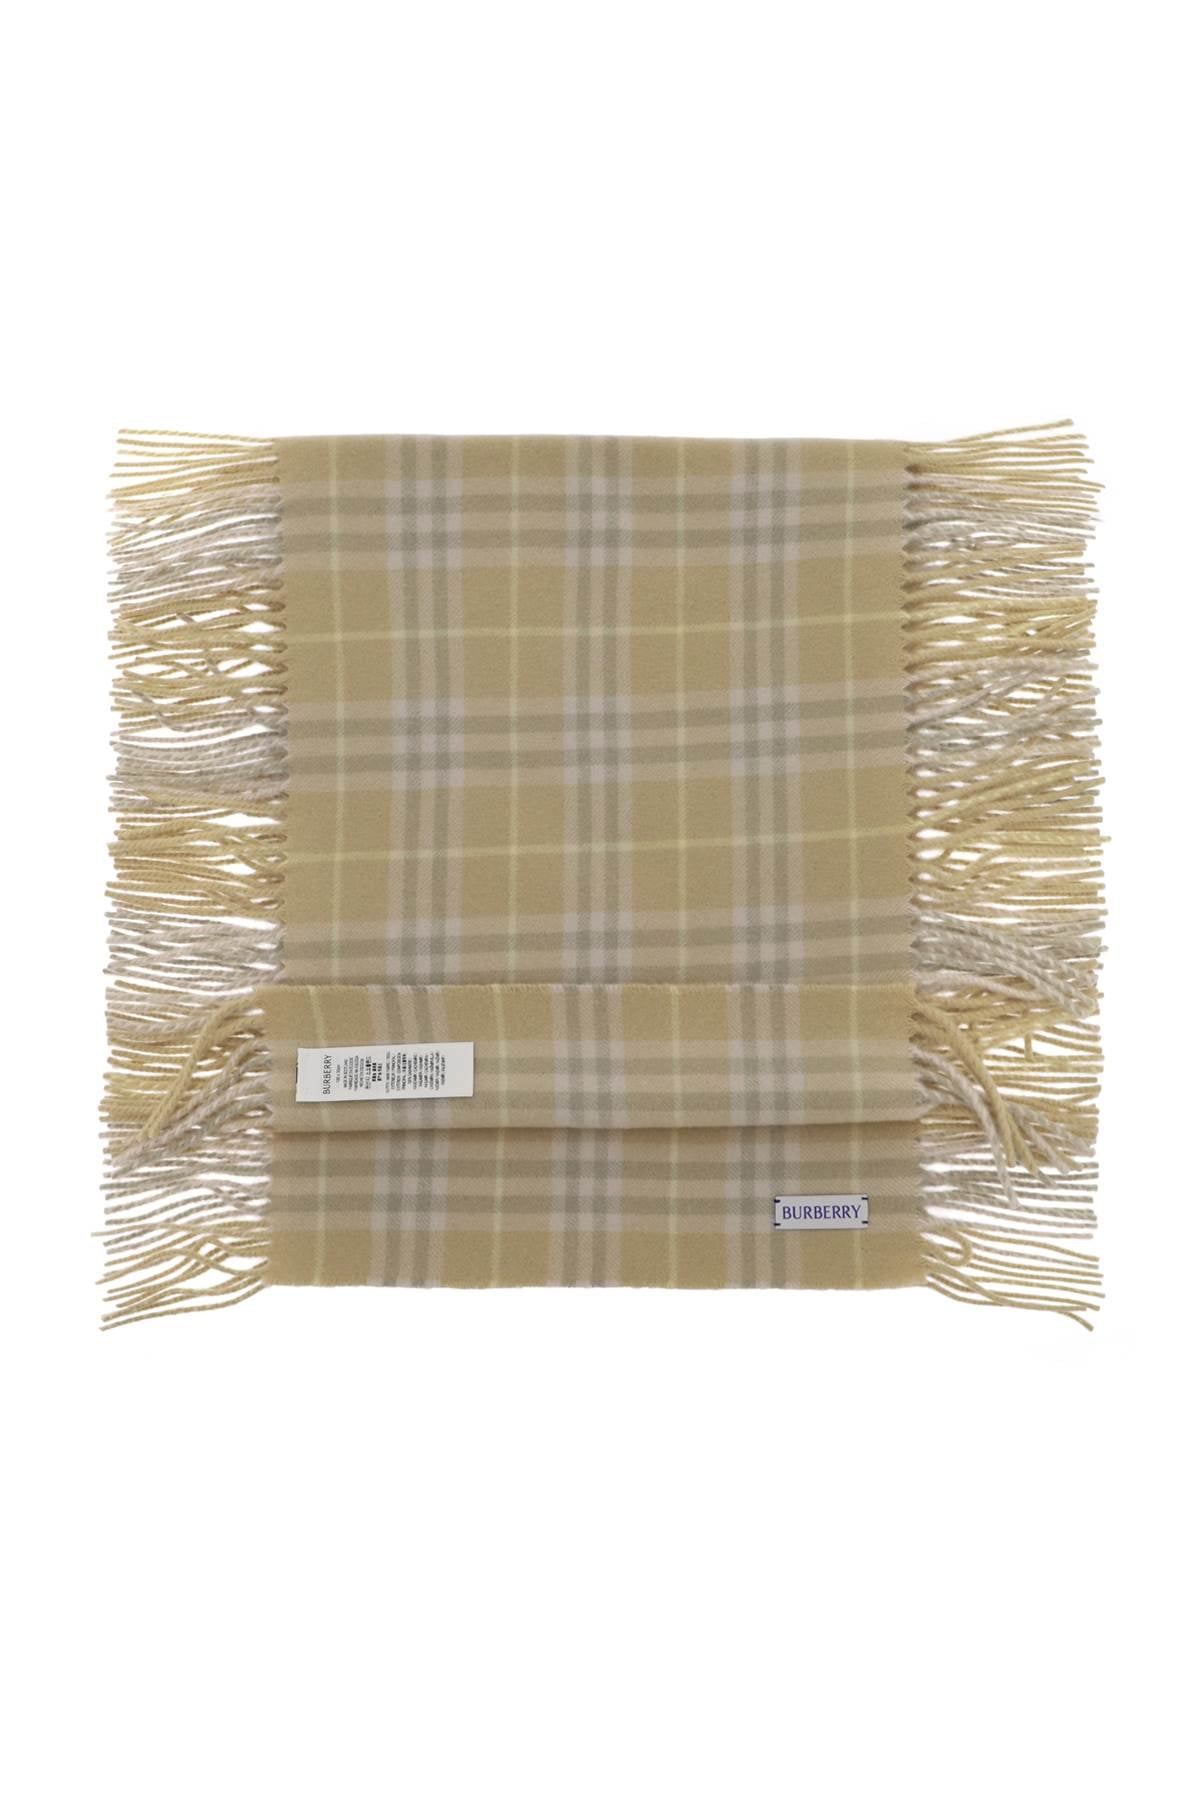 BURBERRY Luxurious Checkered Cashmere Scarf